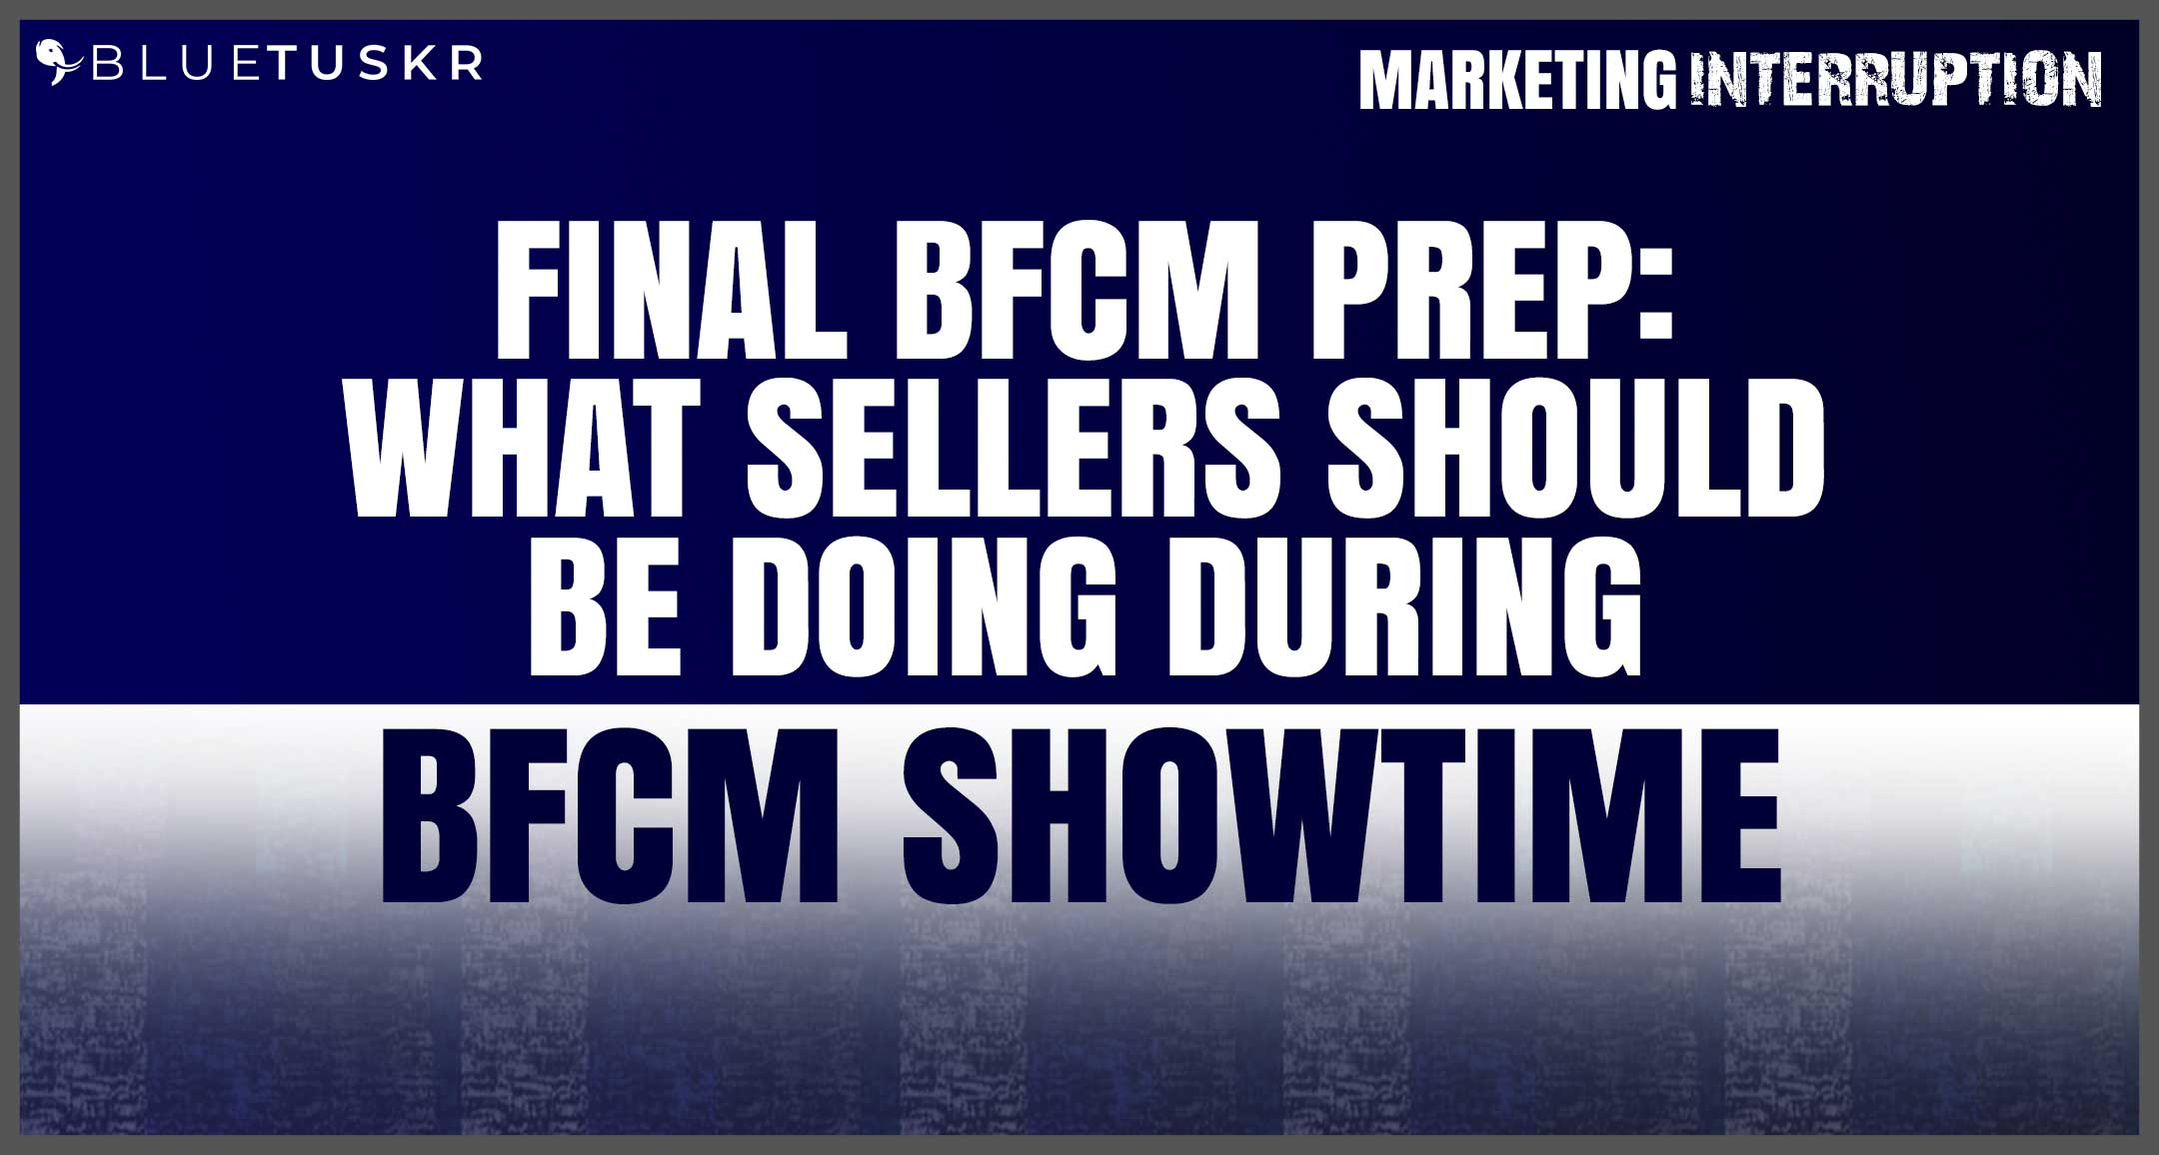 Final BFCM Prep: What Sellers Should Be Doing During BFCM Showtime